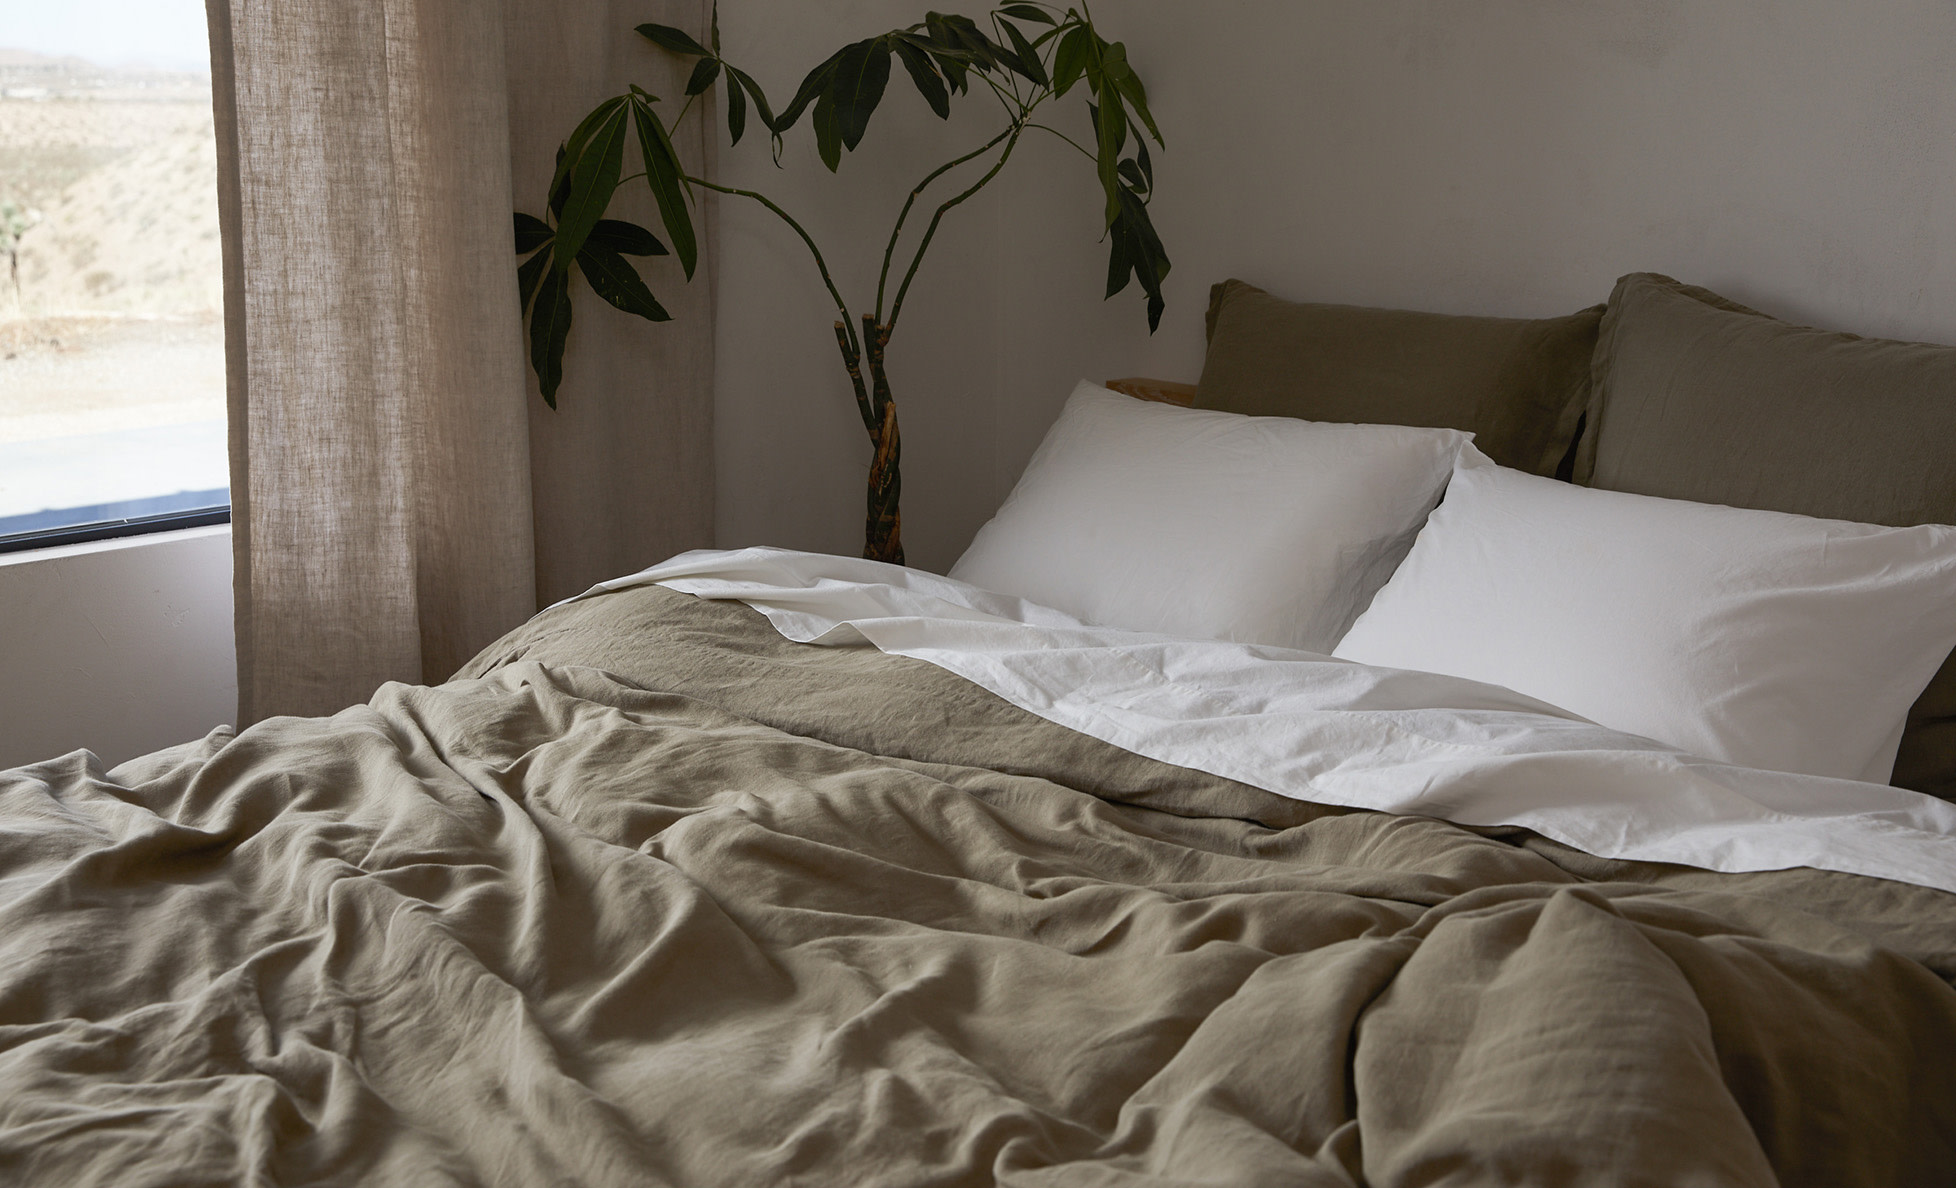 A bed with surplus green linen sheets